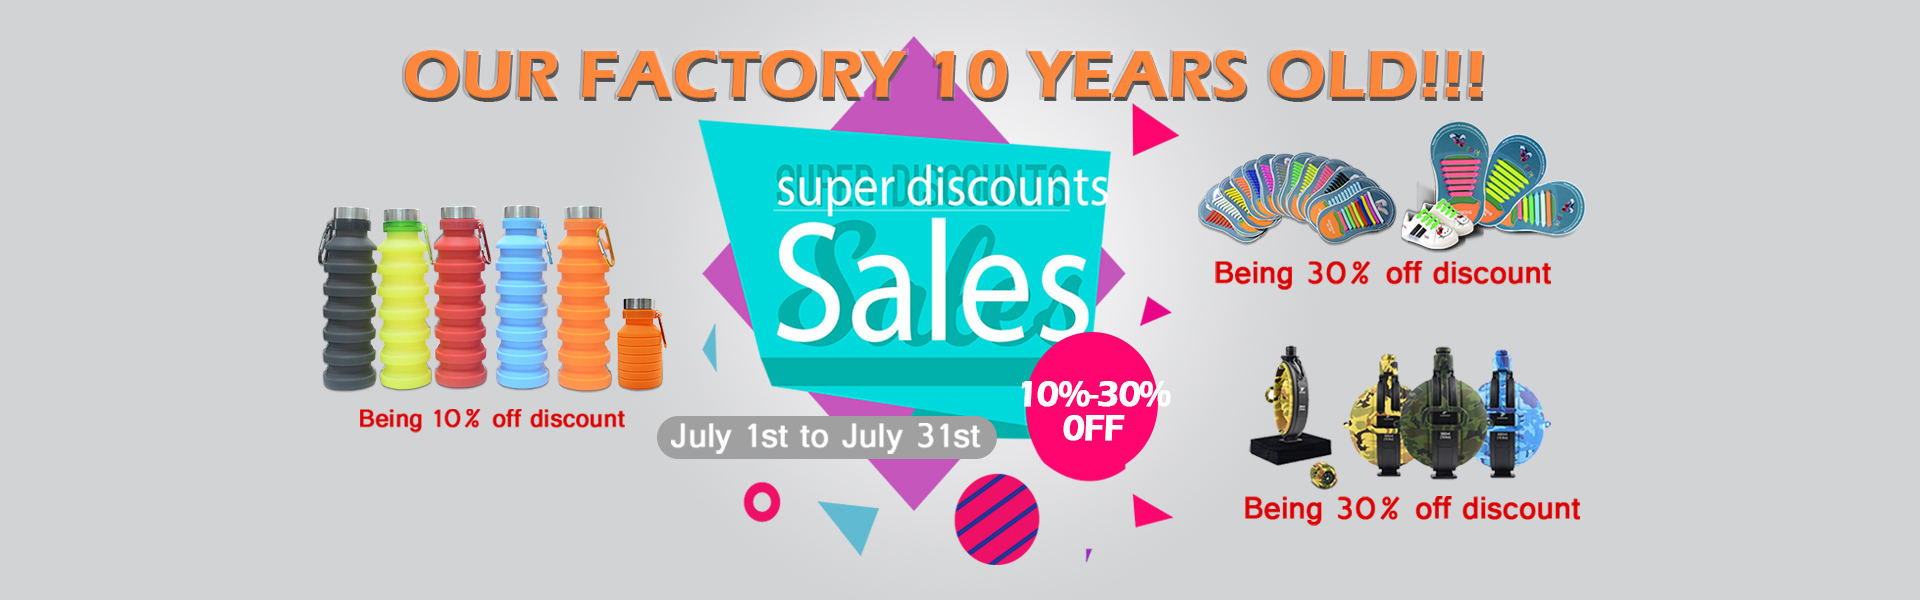 Yuanfeng 10th Anniversary，30% off Amazon hot products